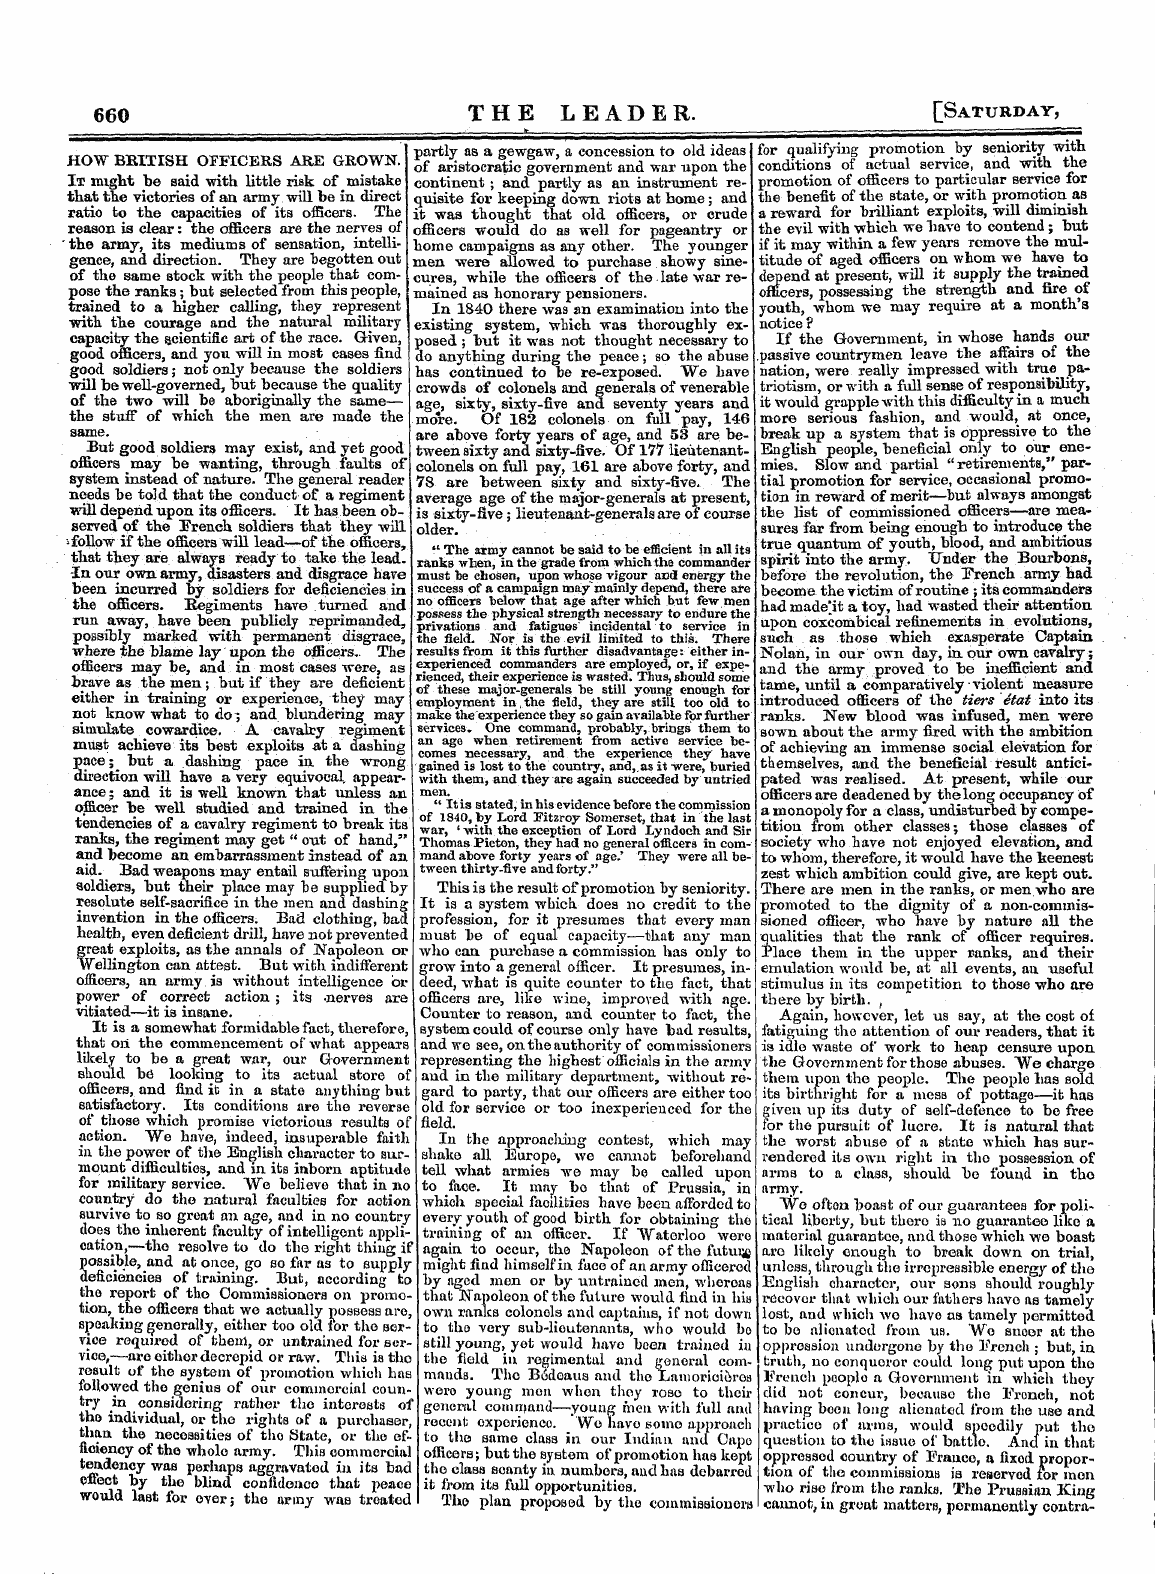 Leader (1850-1860): jS F Y, 1st edition: 12